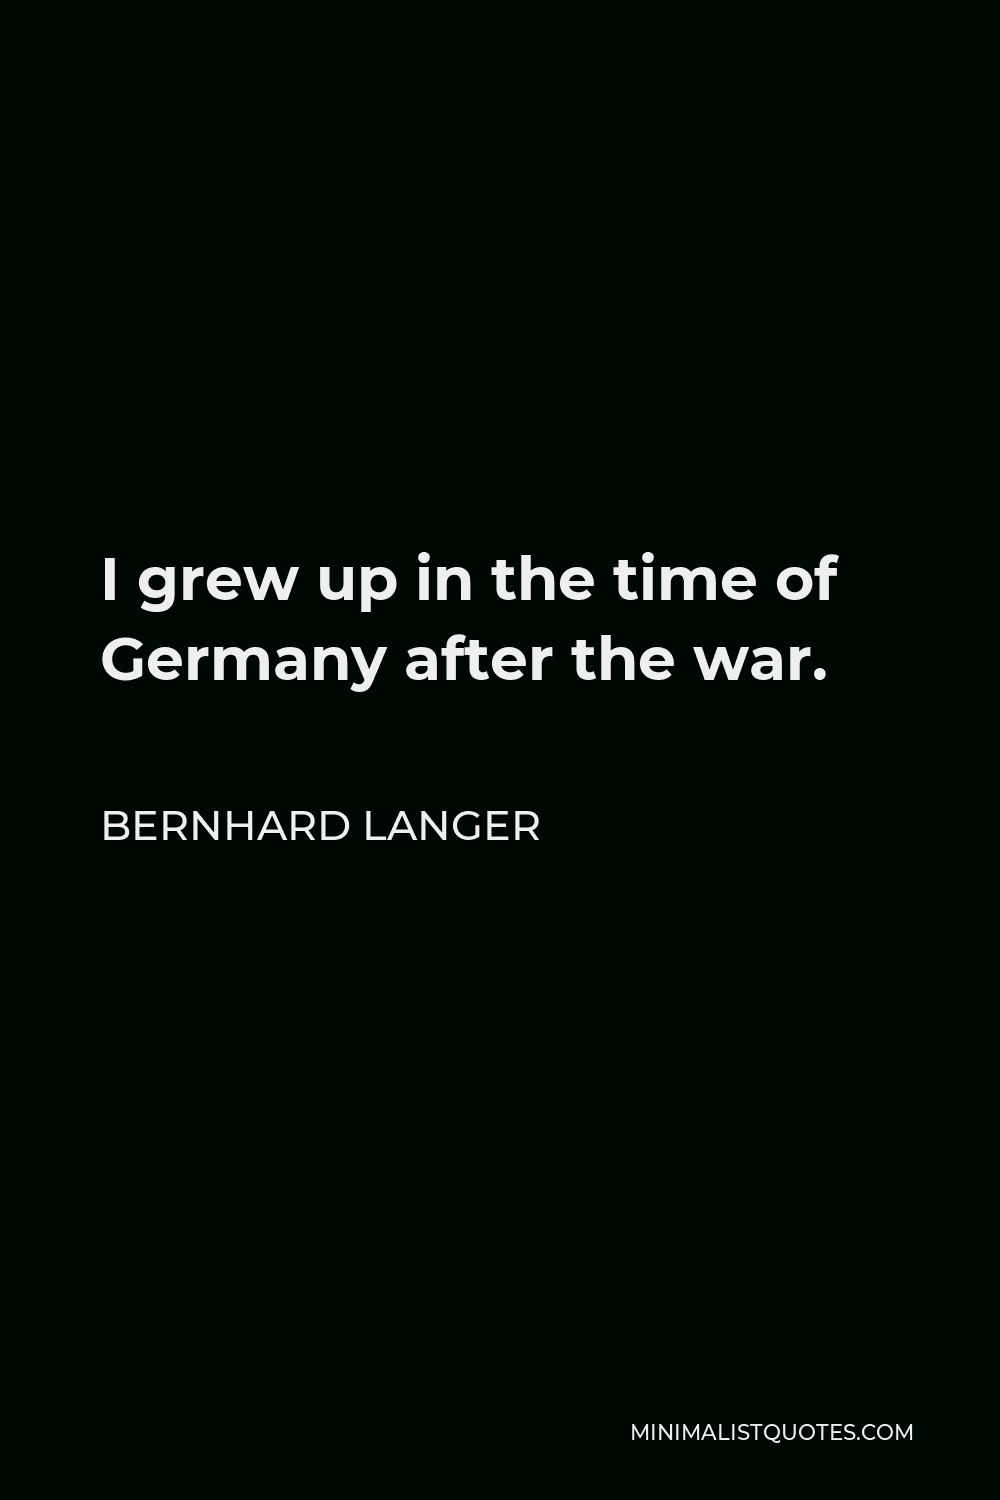 Bernhard Langer Quote - I grew up in the time of Germany after the war.